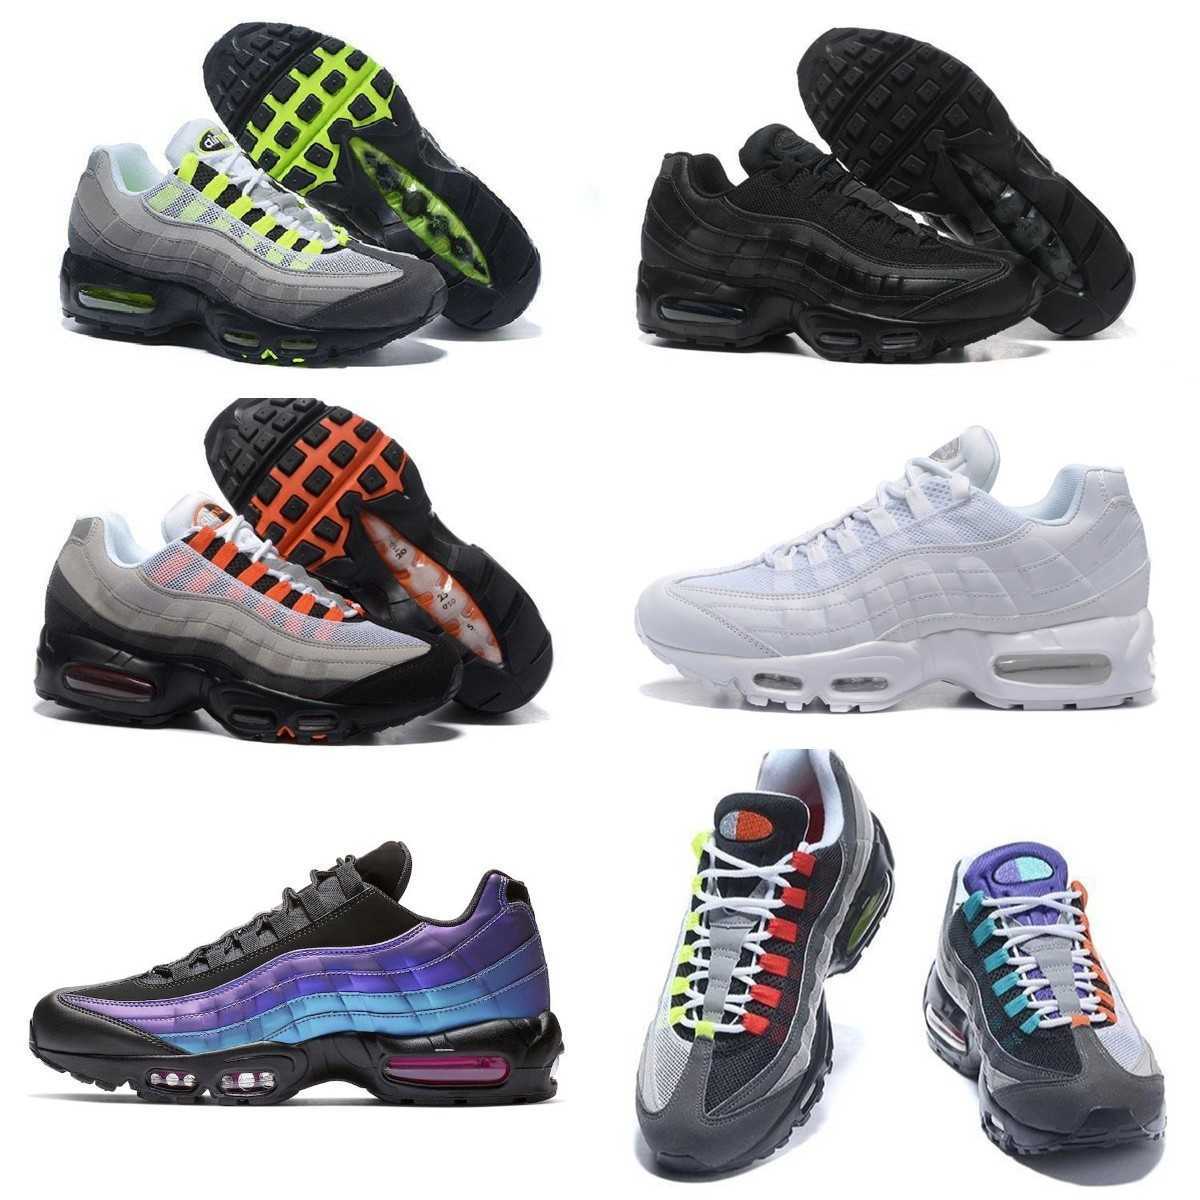 

Designers Mens 95 Running Shoes Yin Yang OG Airs Solar Triple Black White 95s Seahawks Particle Grey Neon Red Greedy 3.0 Laser Fuchsia Walking Trainer Sports Sneakers, Please contact us